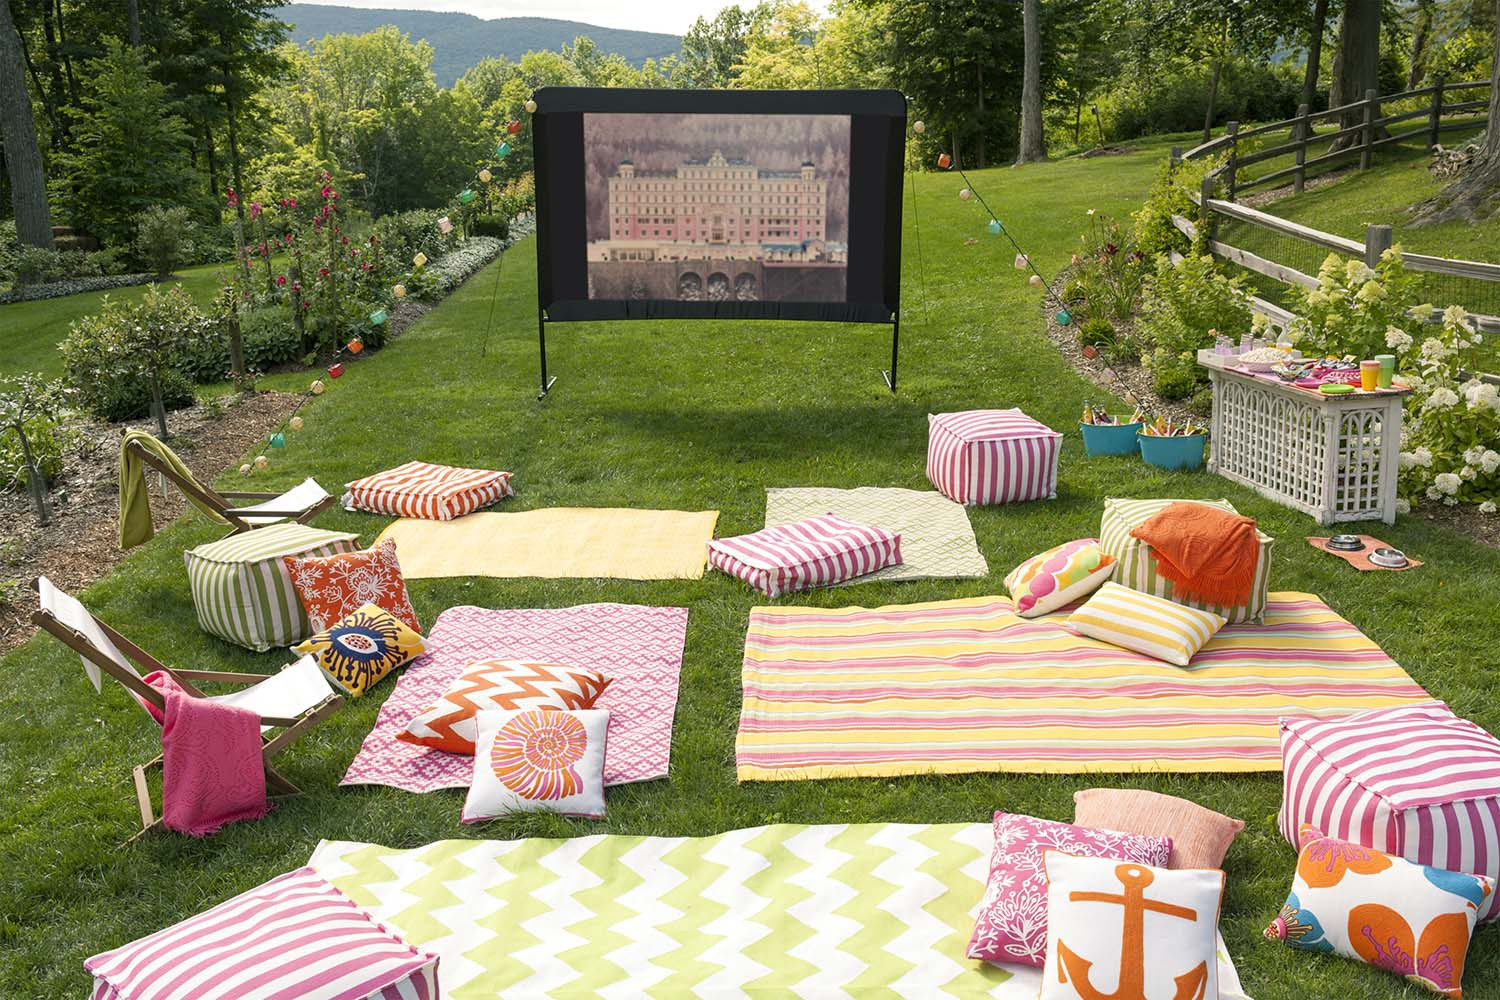 DIY Outdoor Movie Theater
 Easy DIY Outdoor Cinema Will Make Your Yard The Ultimate